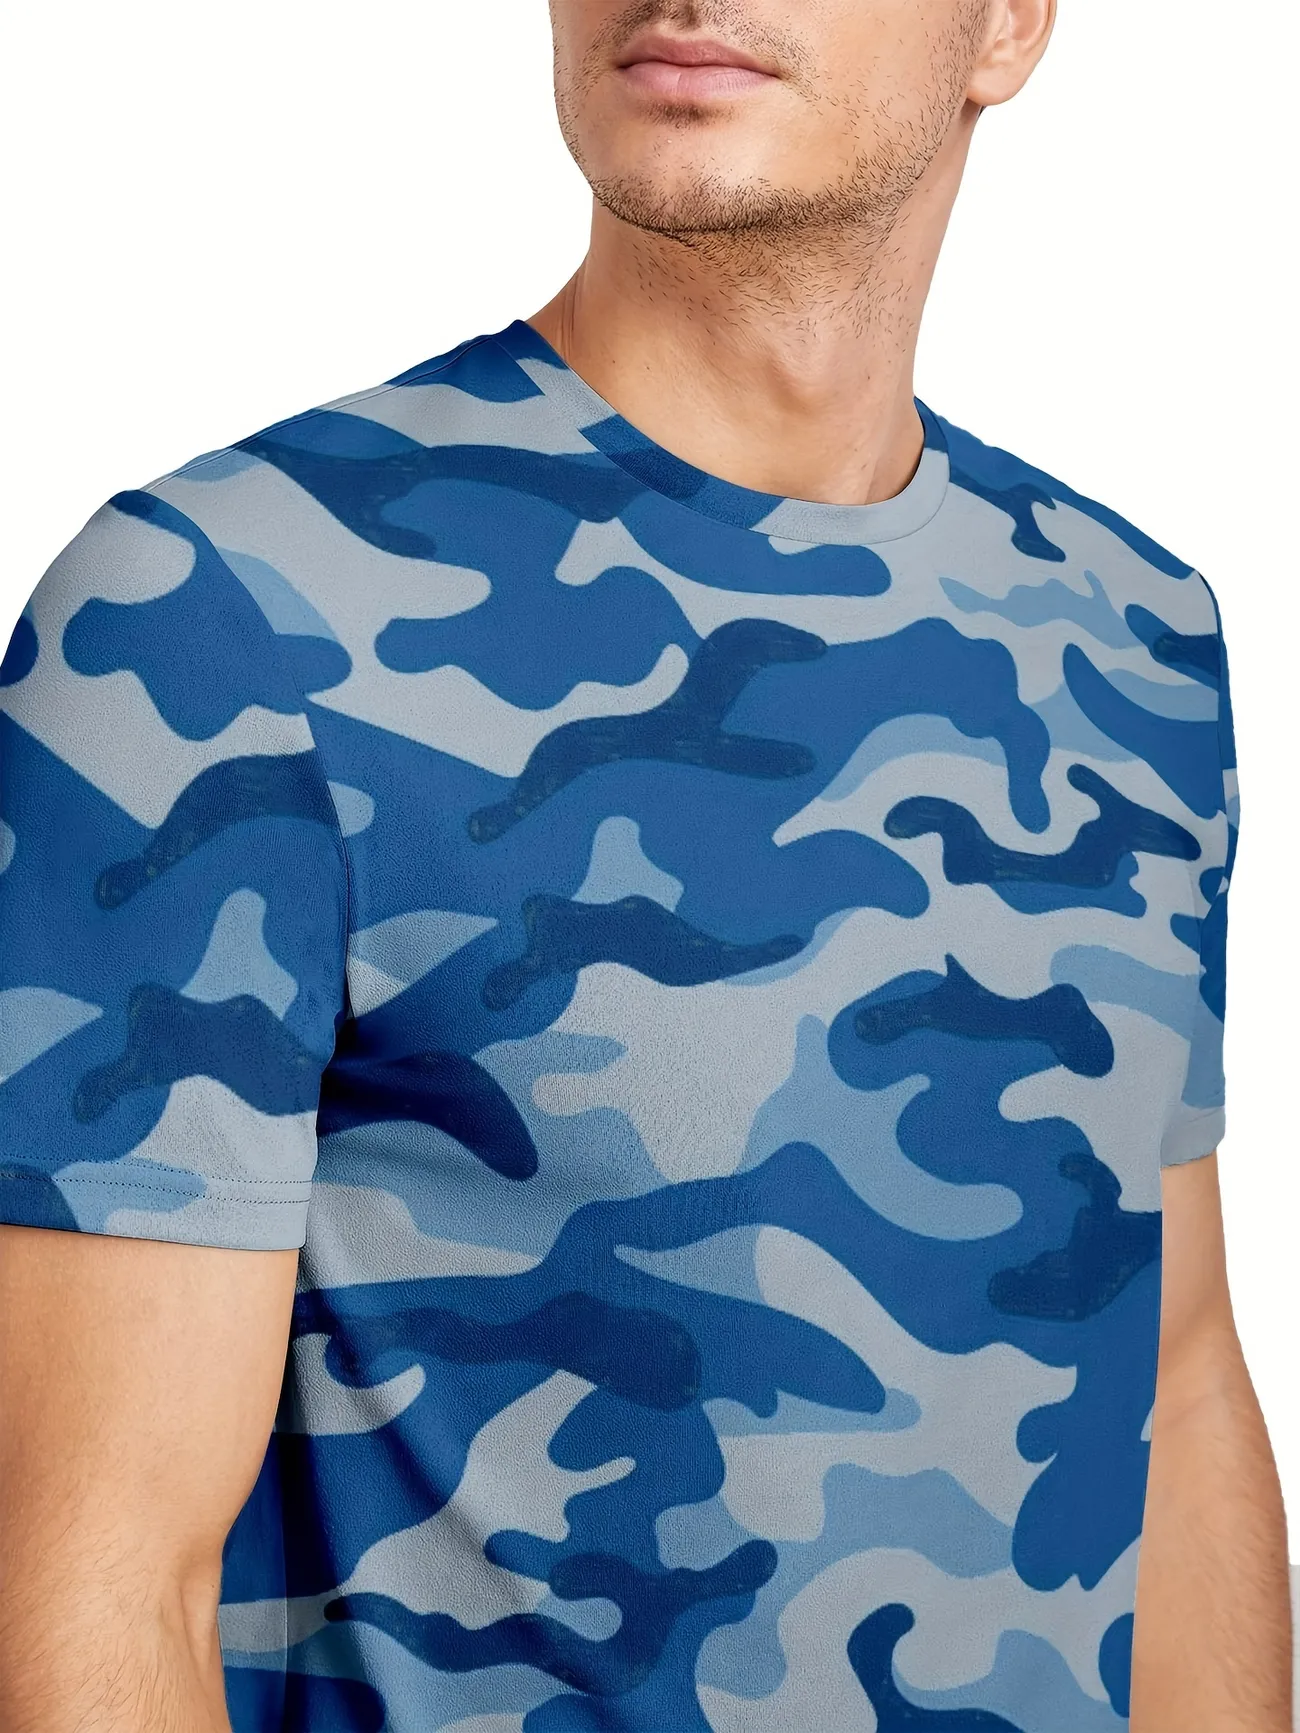 Men's Camouflage Print Tee Shirt - Casual Short Sleeve T-shirt For